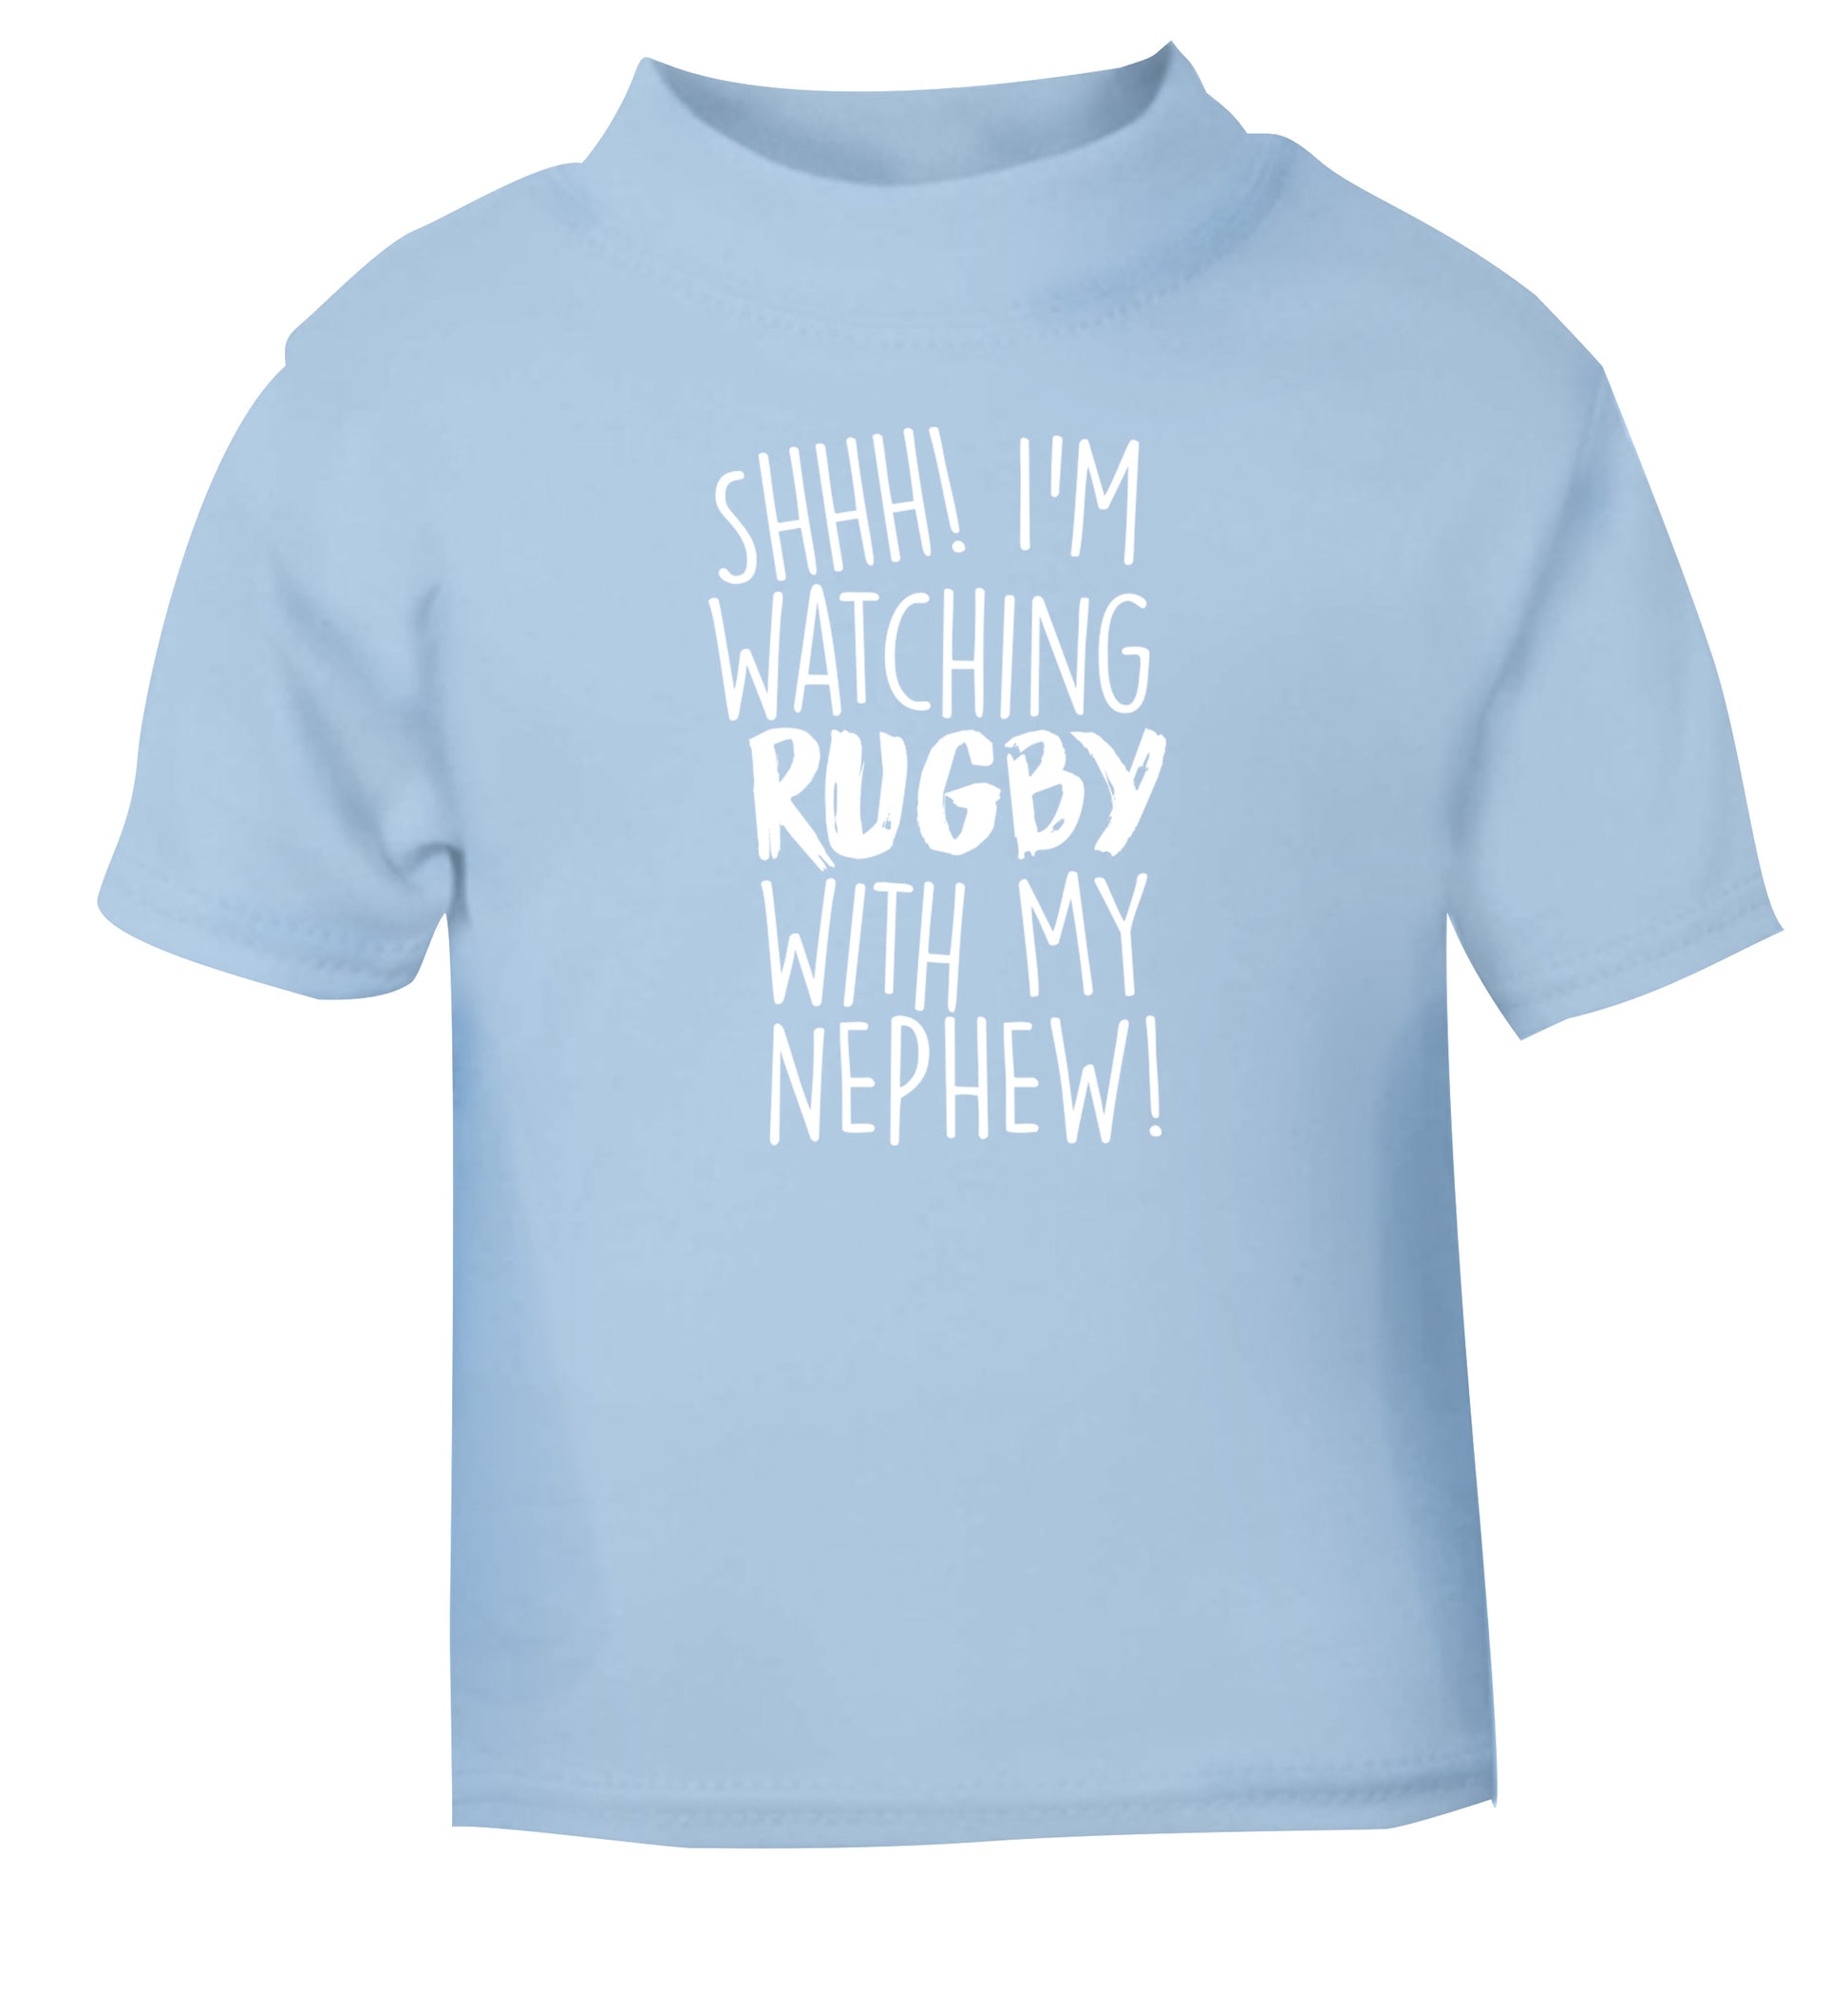 Shh.. I'm watching rugby with my nephew light blue Baby Toddler Tshirt 2 Years